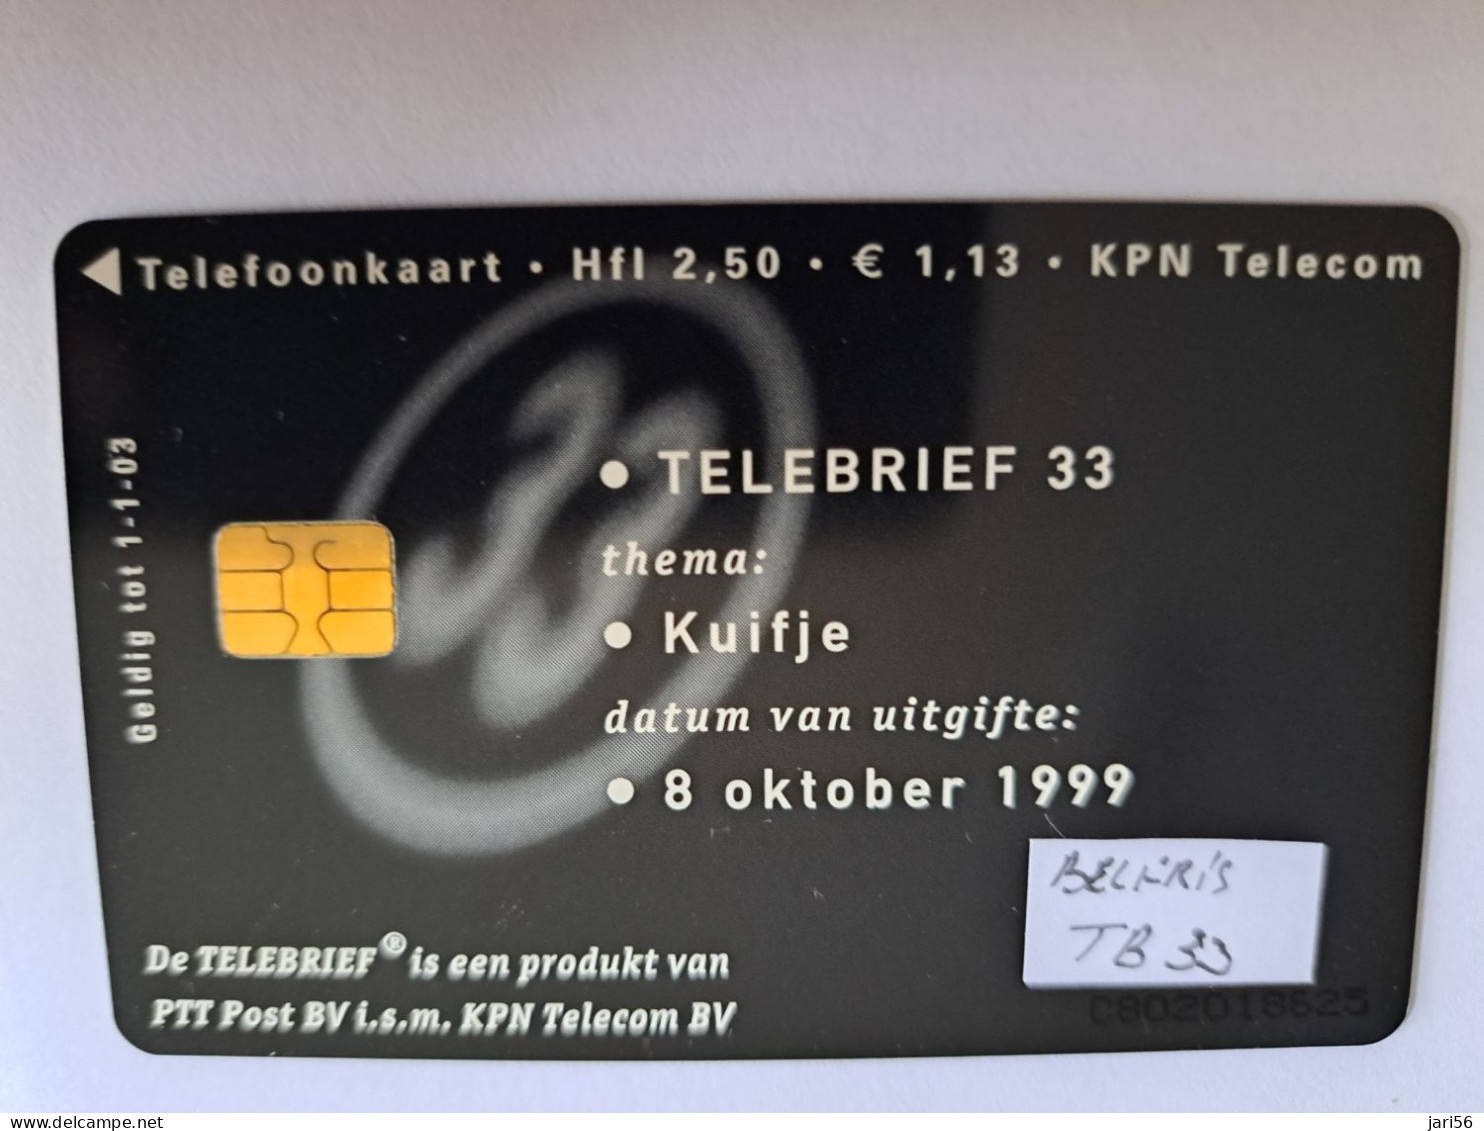 NETHERLANDS  ADVERTISING CHIPCARD / TELEBRIEF 33  Hfl 2,50   ANIMATION/TIN TIN / KUIFJE ON THE MOON   ** 12944 ** - Private